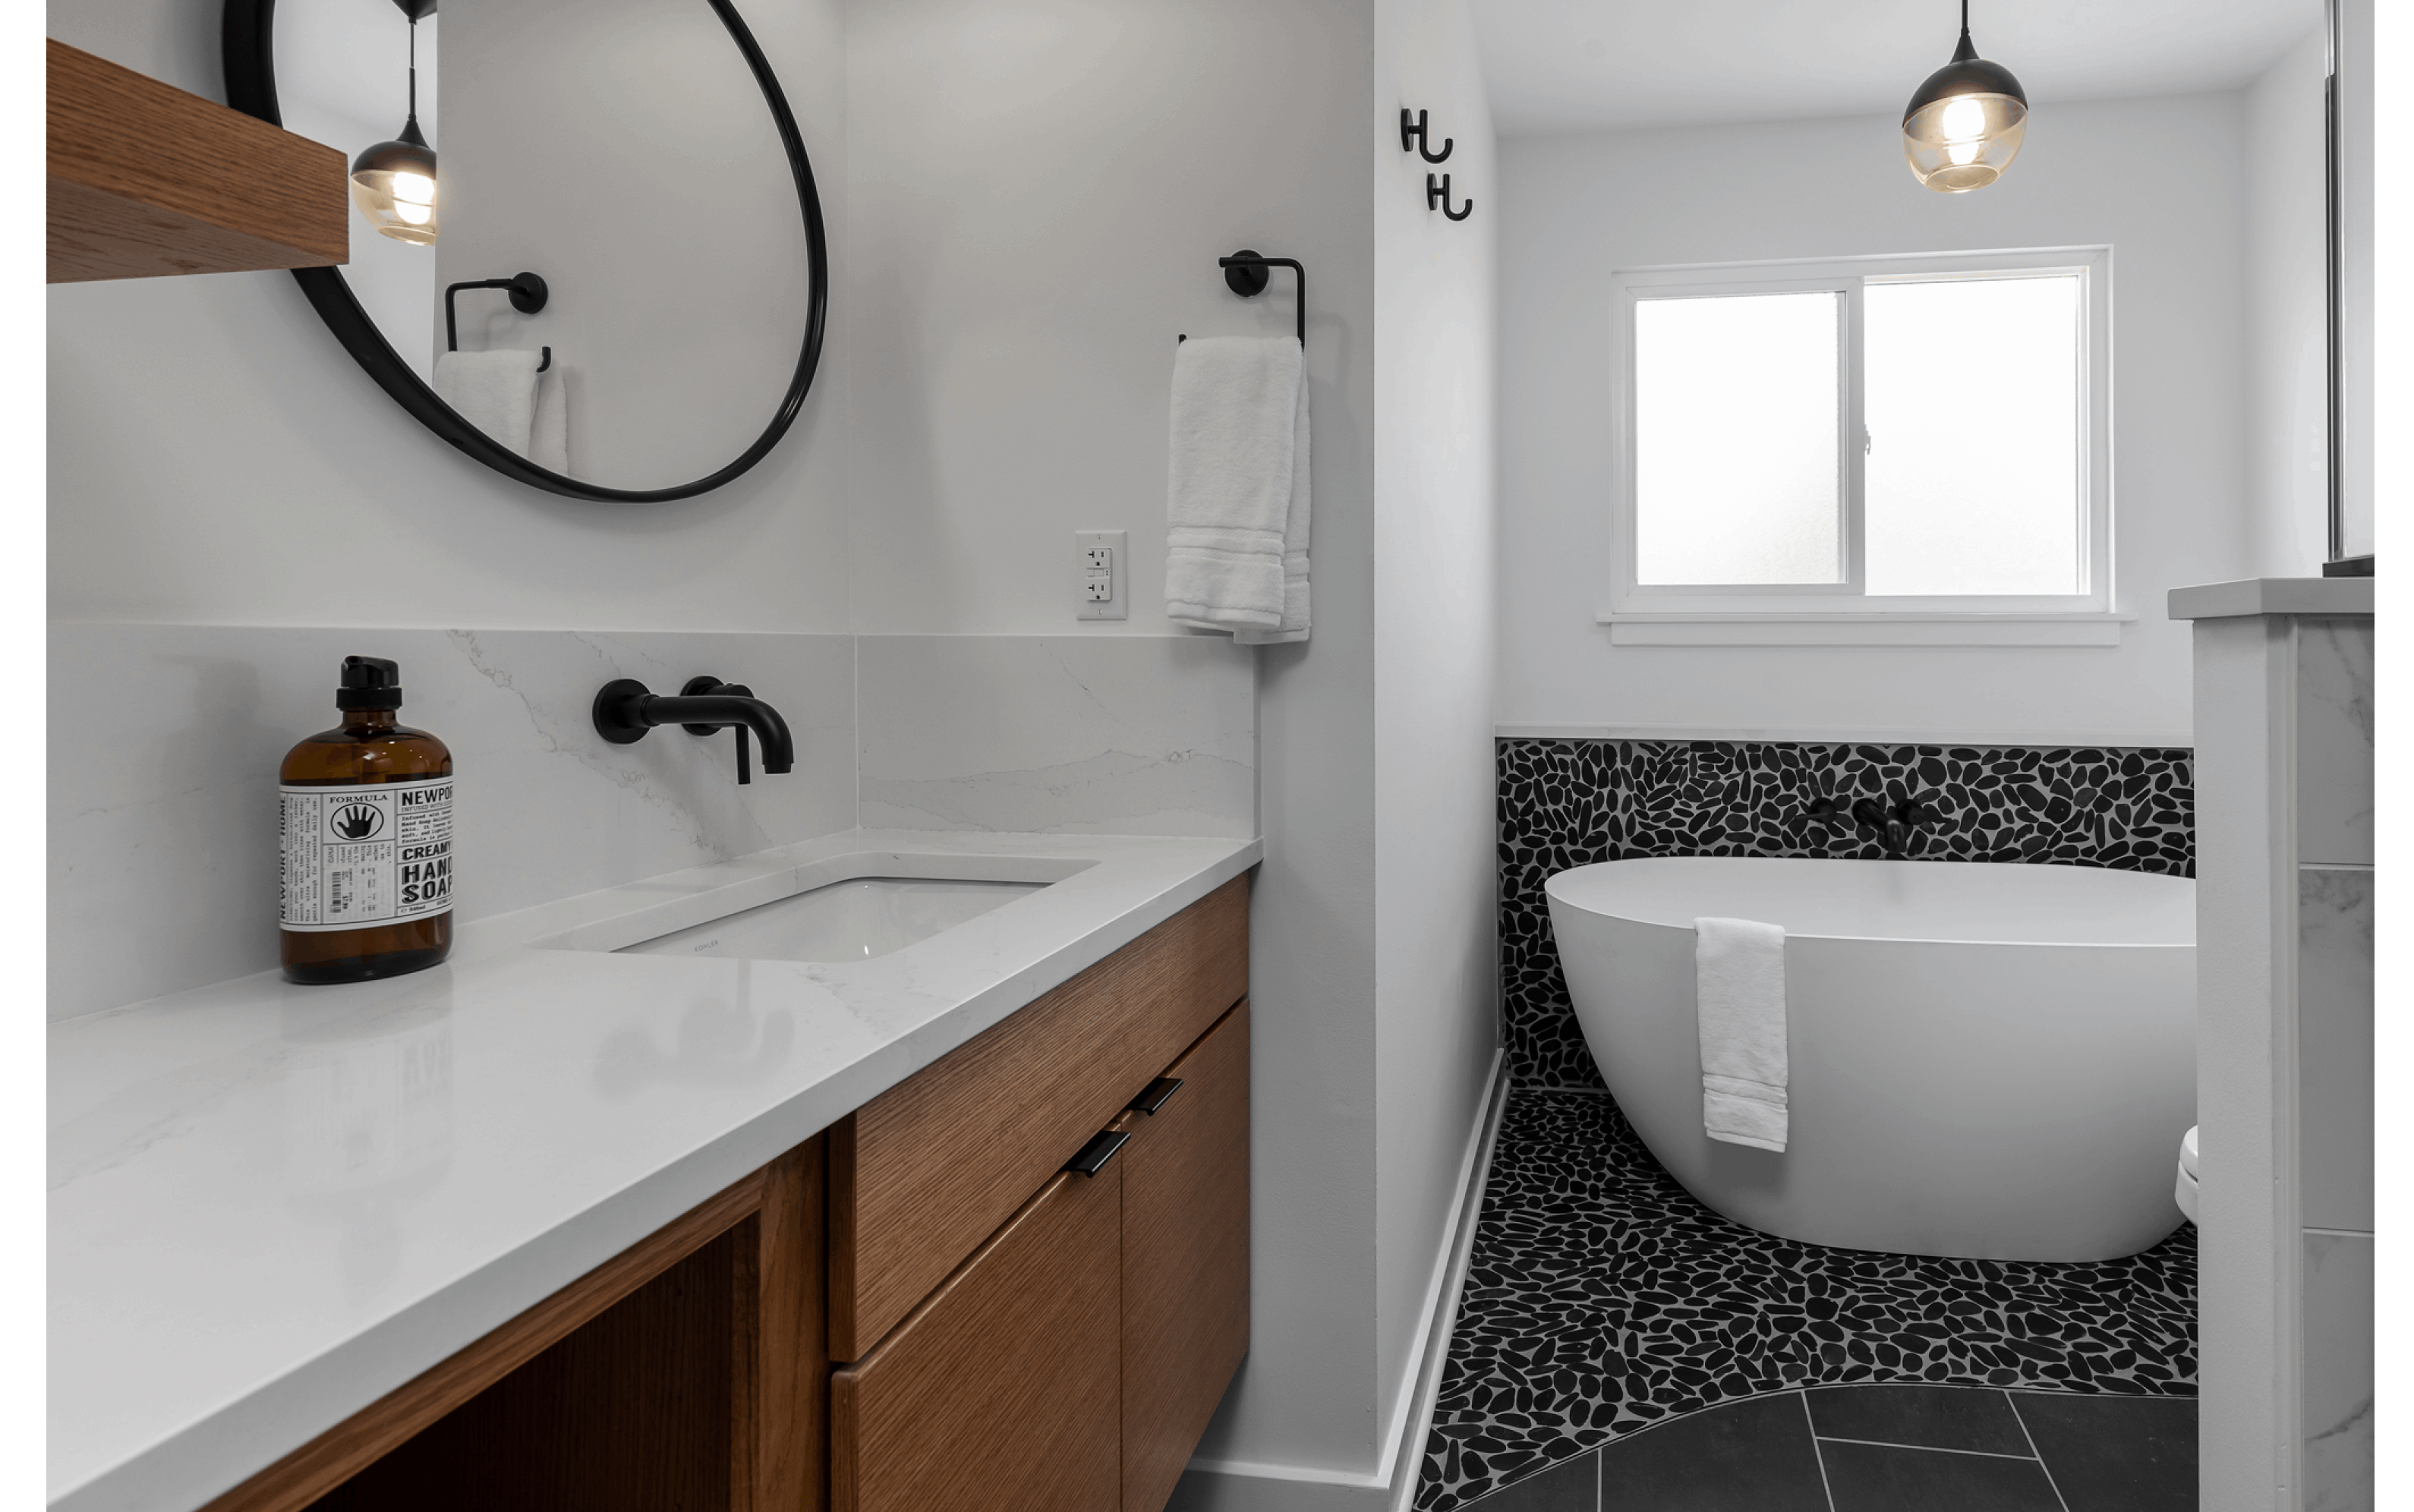 Cozy renovated bathroom with floating wooden vanity and shelves, and unique black pebble-tile under a large soaking tub